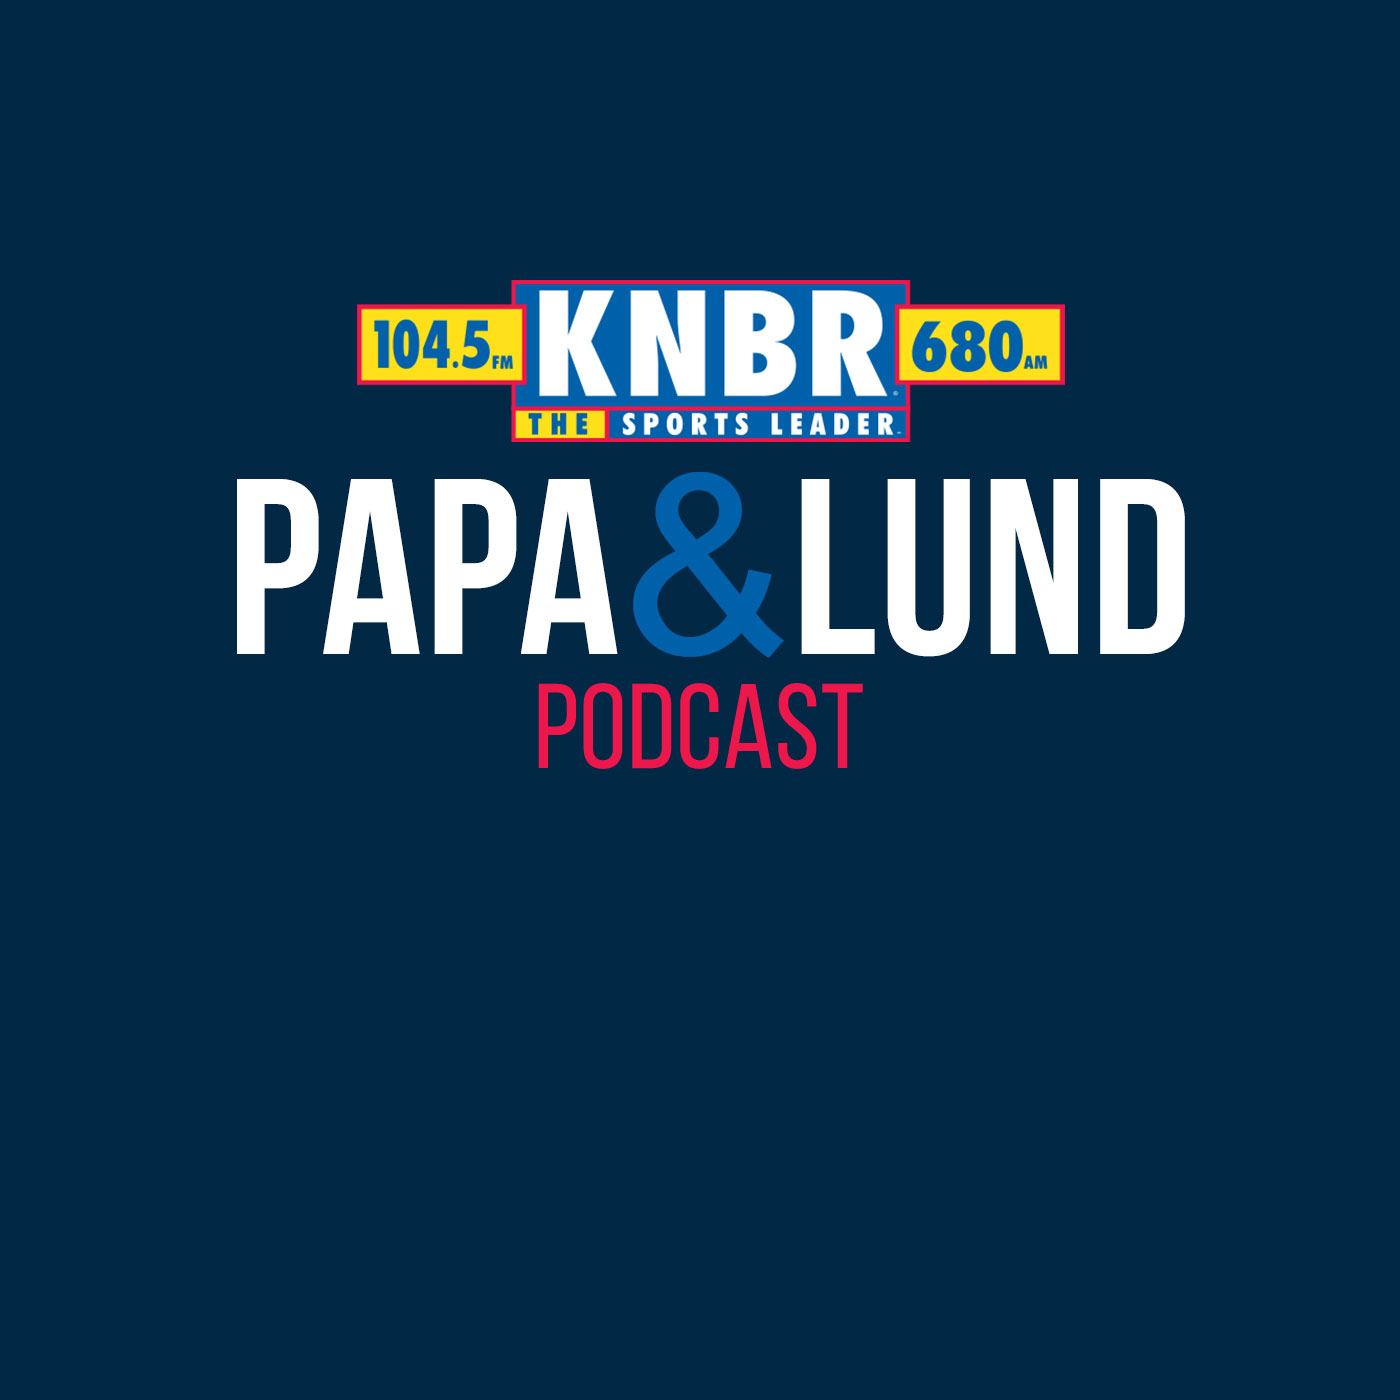 5-22 Dan Hayes joins Papa & Lund to discuss the latest on the Twins and Carlos Correa as the Giants arrive in Minnesota